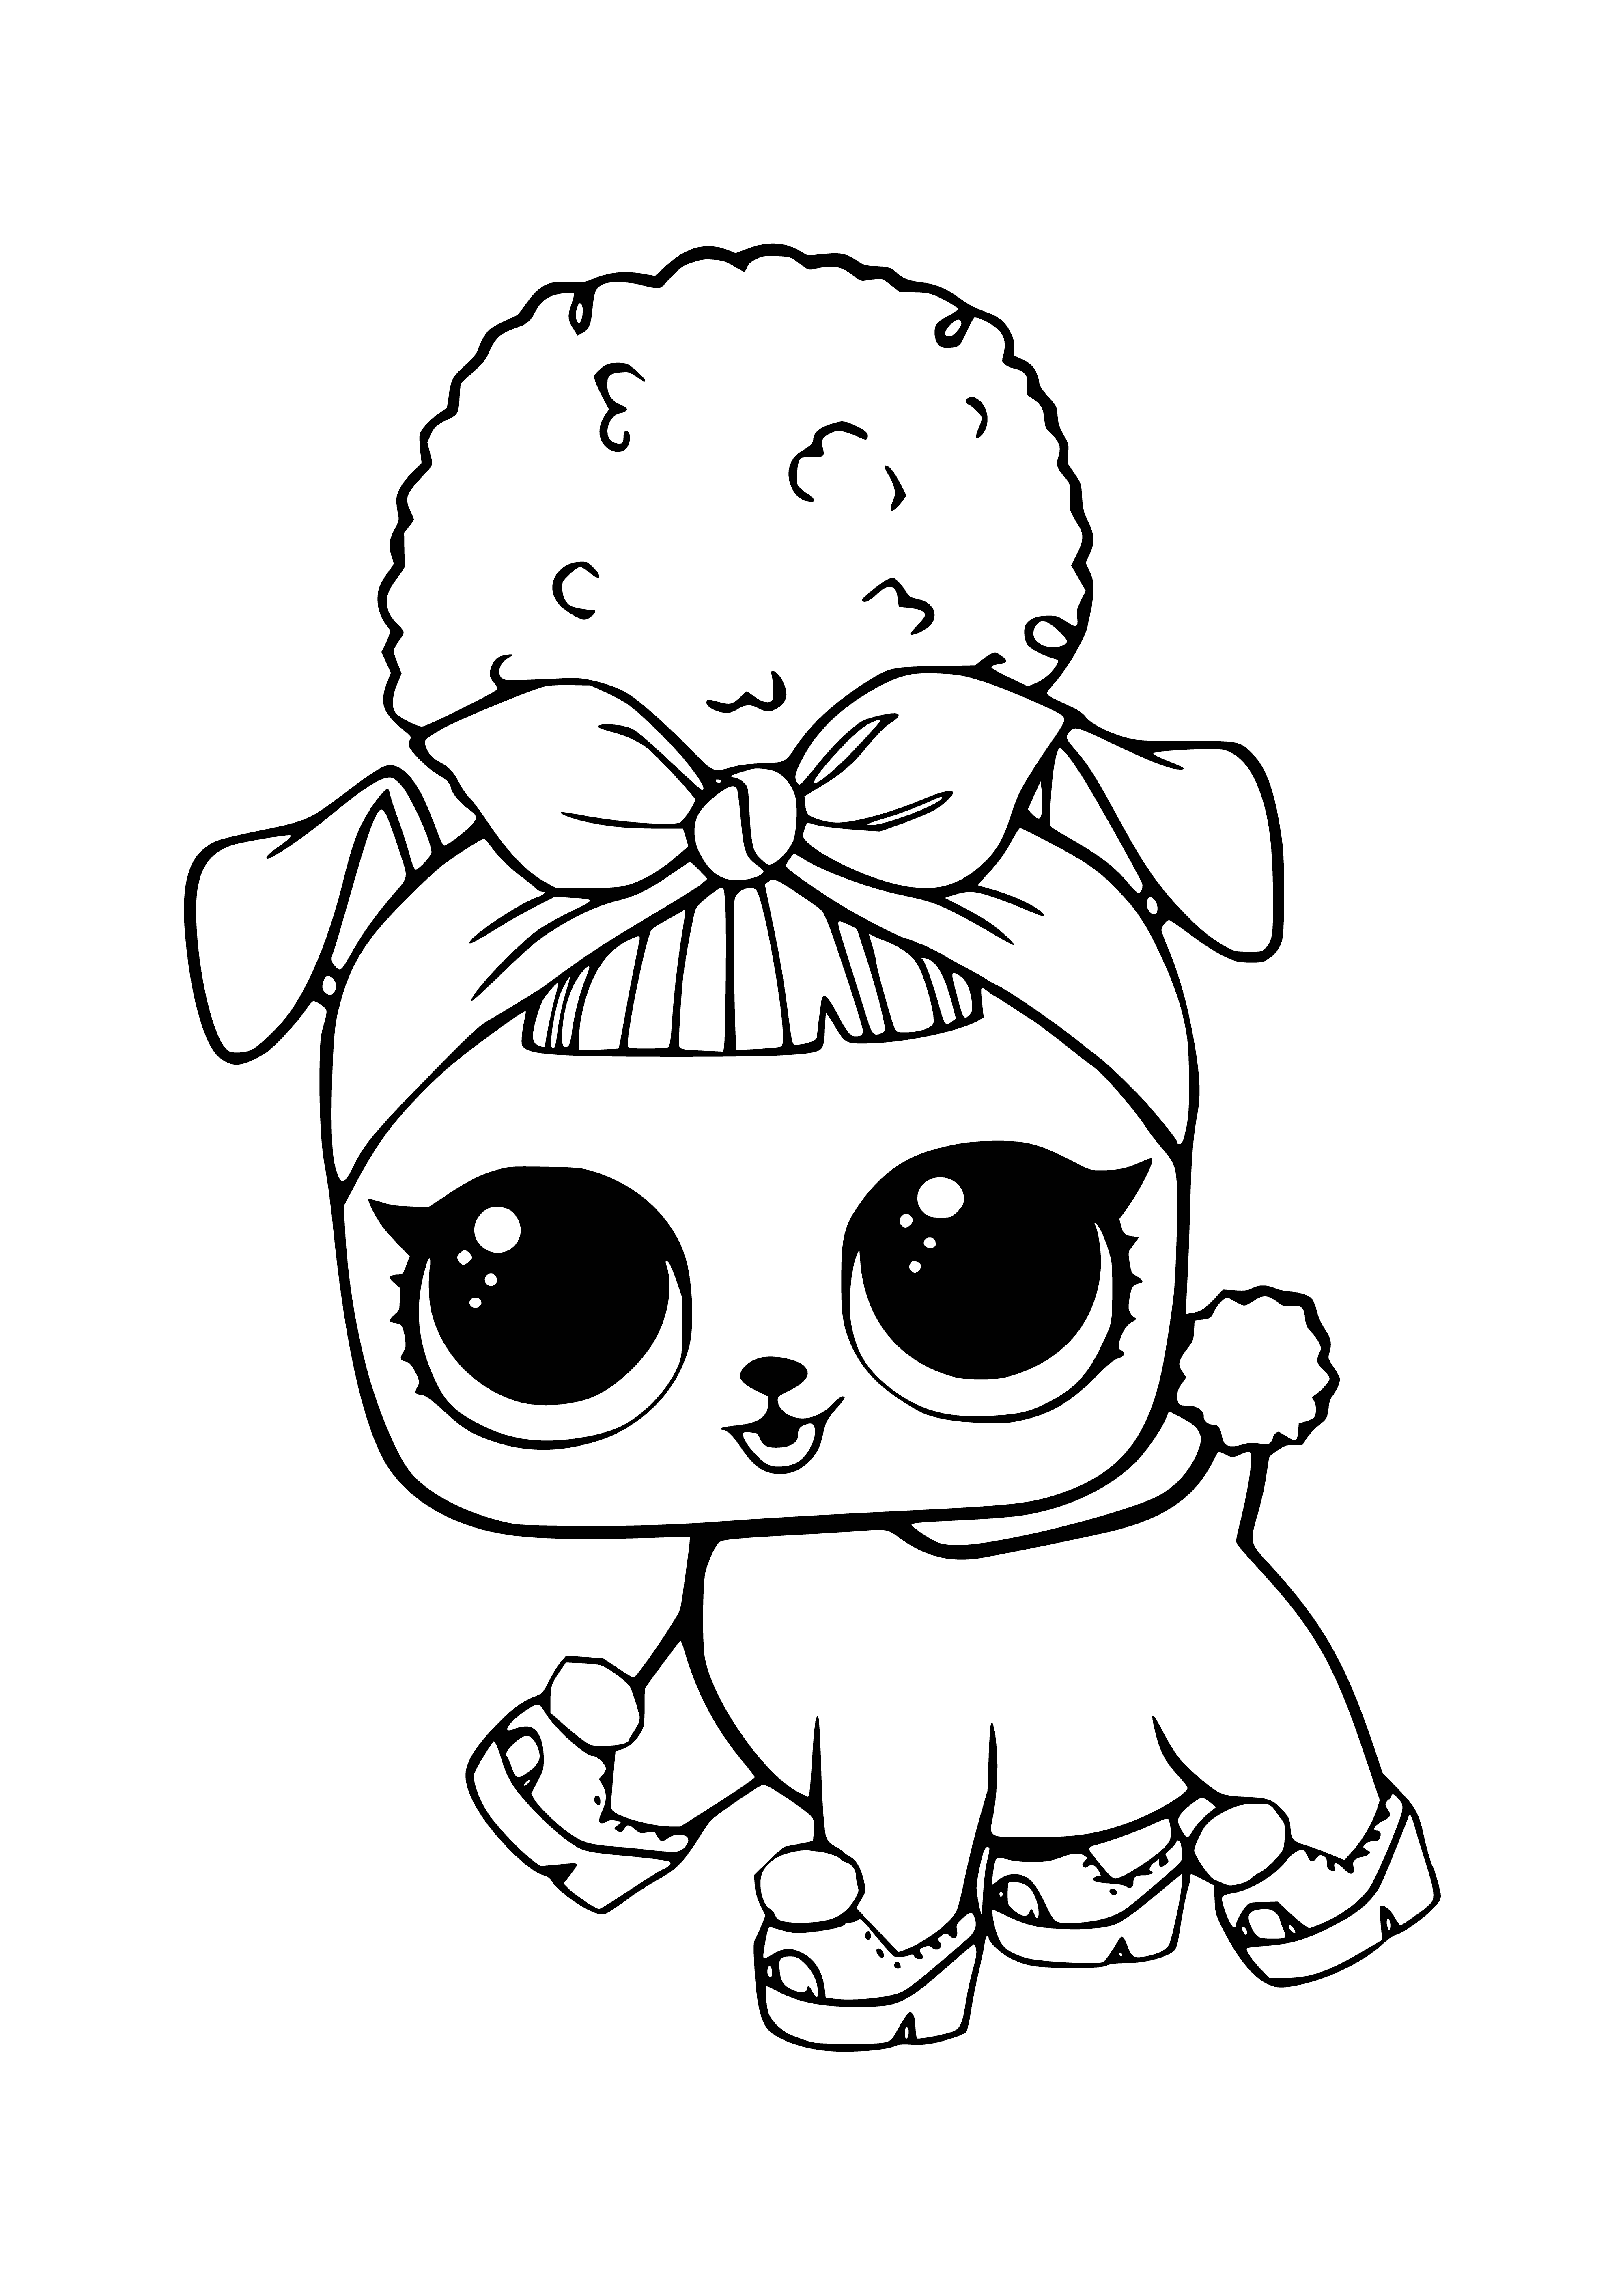 coloring page: Cute pale-colored puppy with big ears and black/yellow stripes stands on white background in coloring page. #puppy #coloringpage